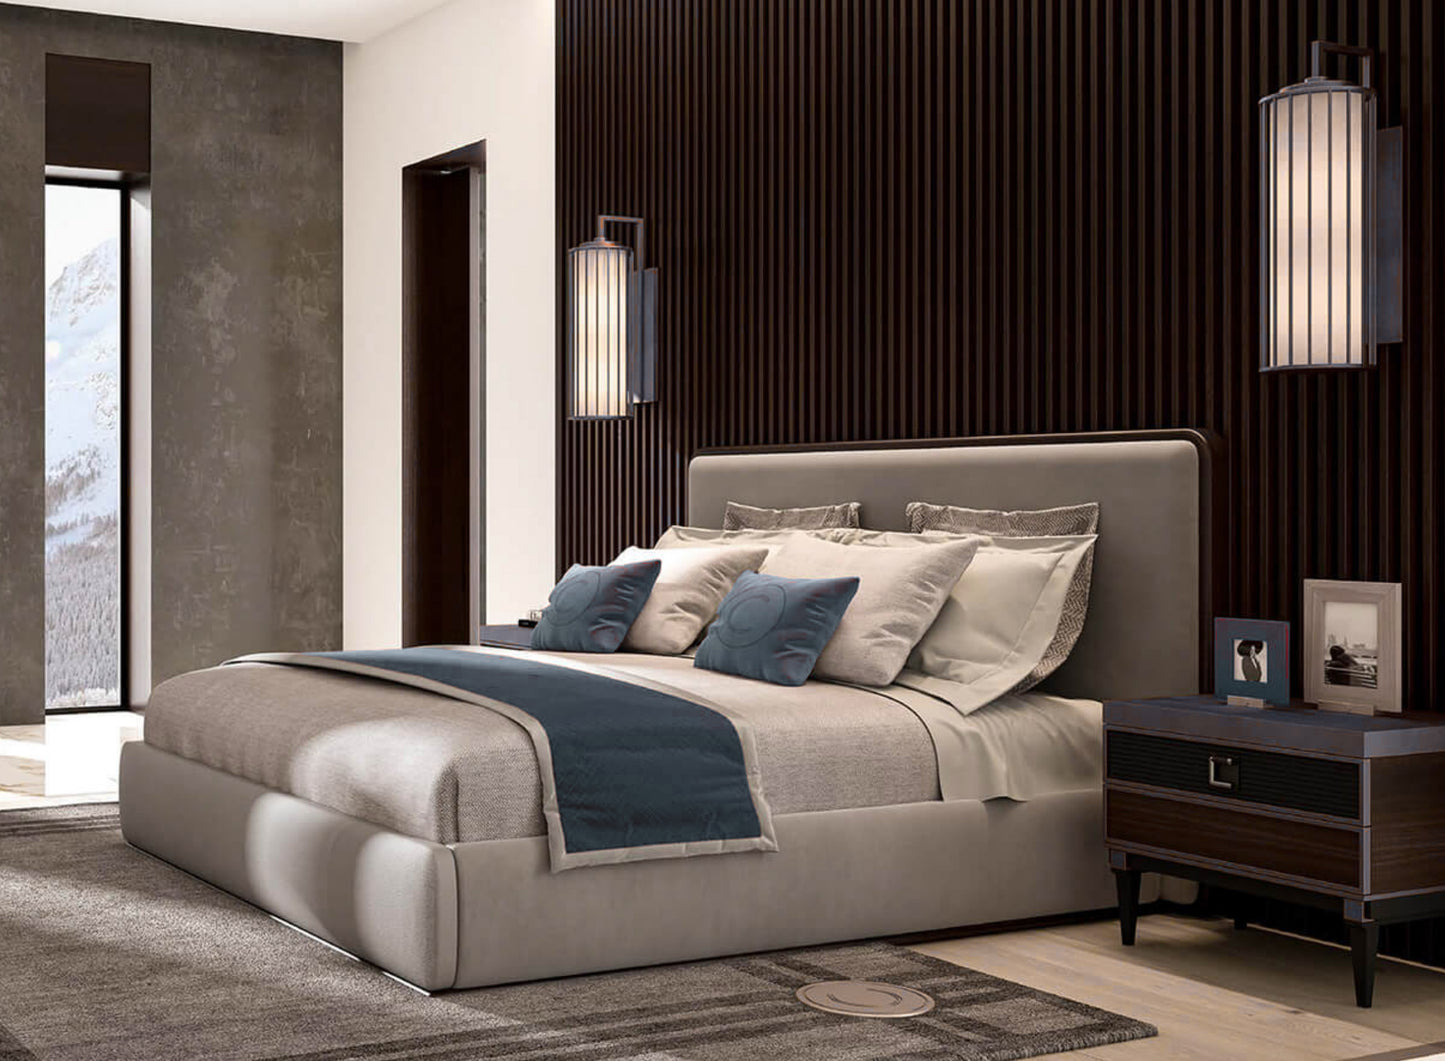 SENSO | Bed by CPRN